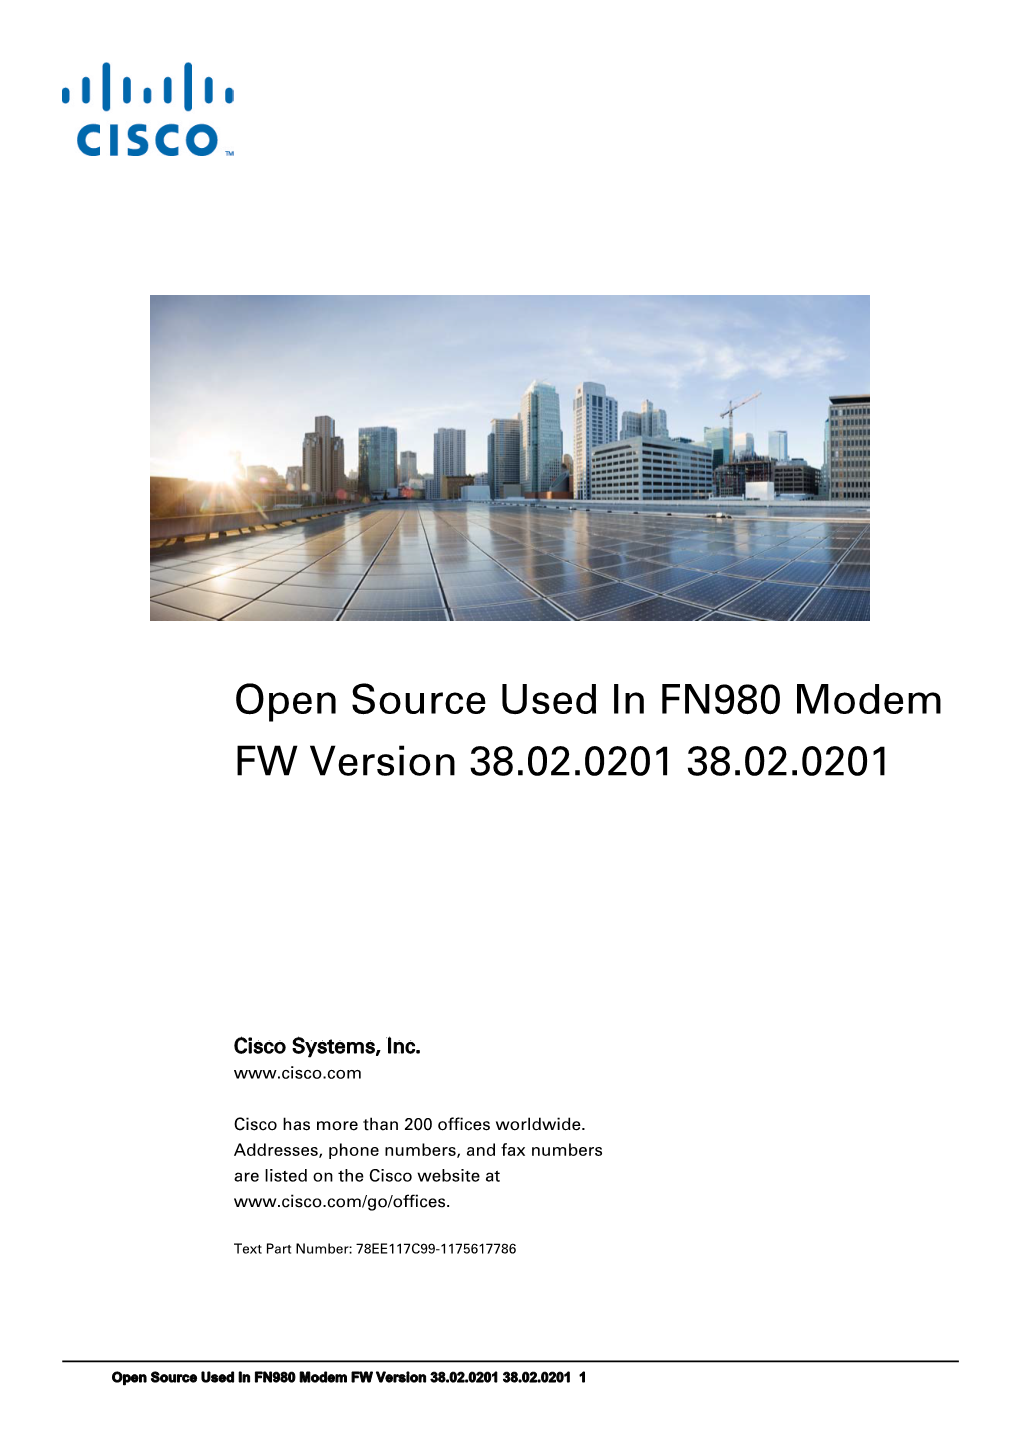 Open Source Used in FN980 Modem FW Version 38.02.0201 38.02.0201